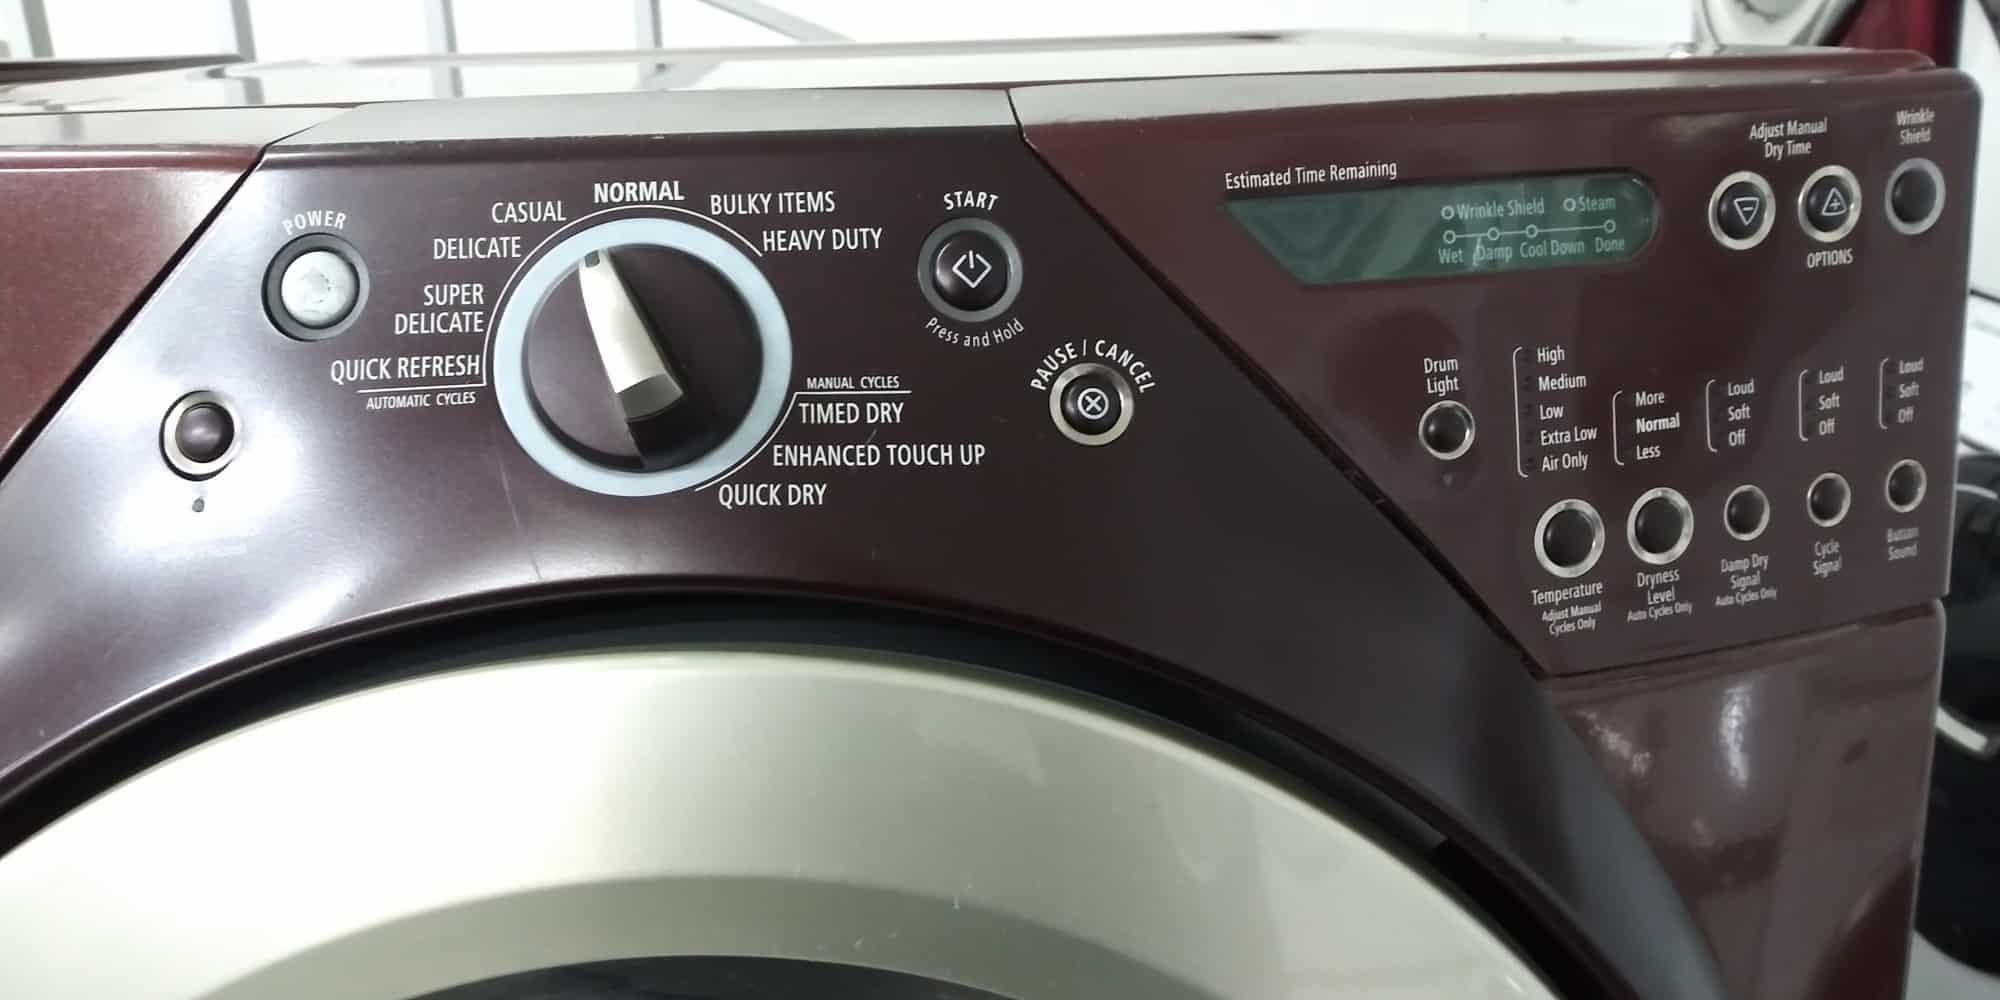 How To Fix The Error Code F24 For Whirlpool Washer